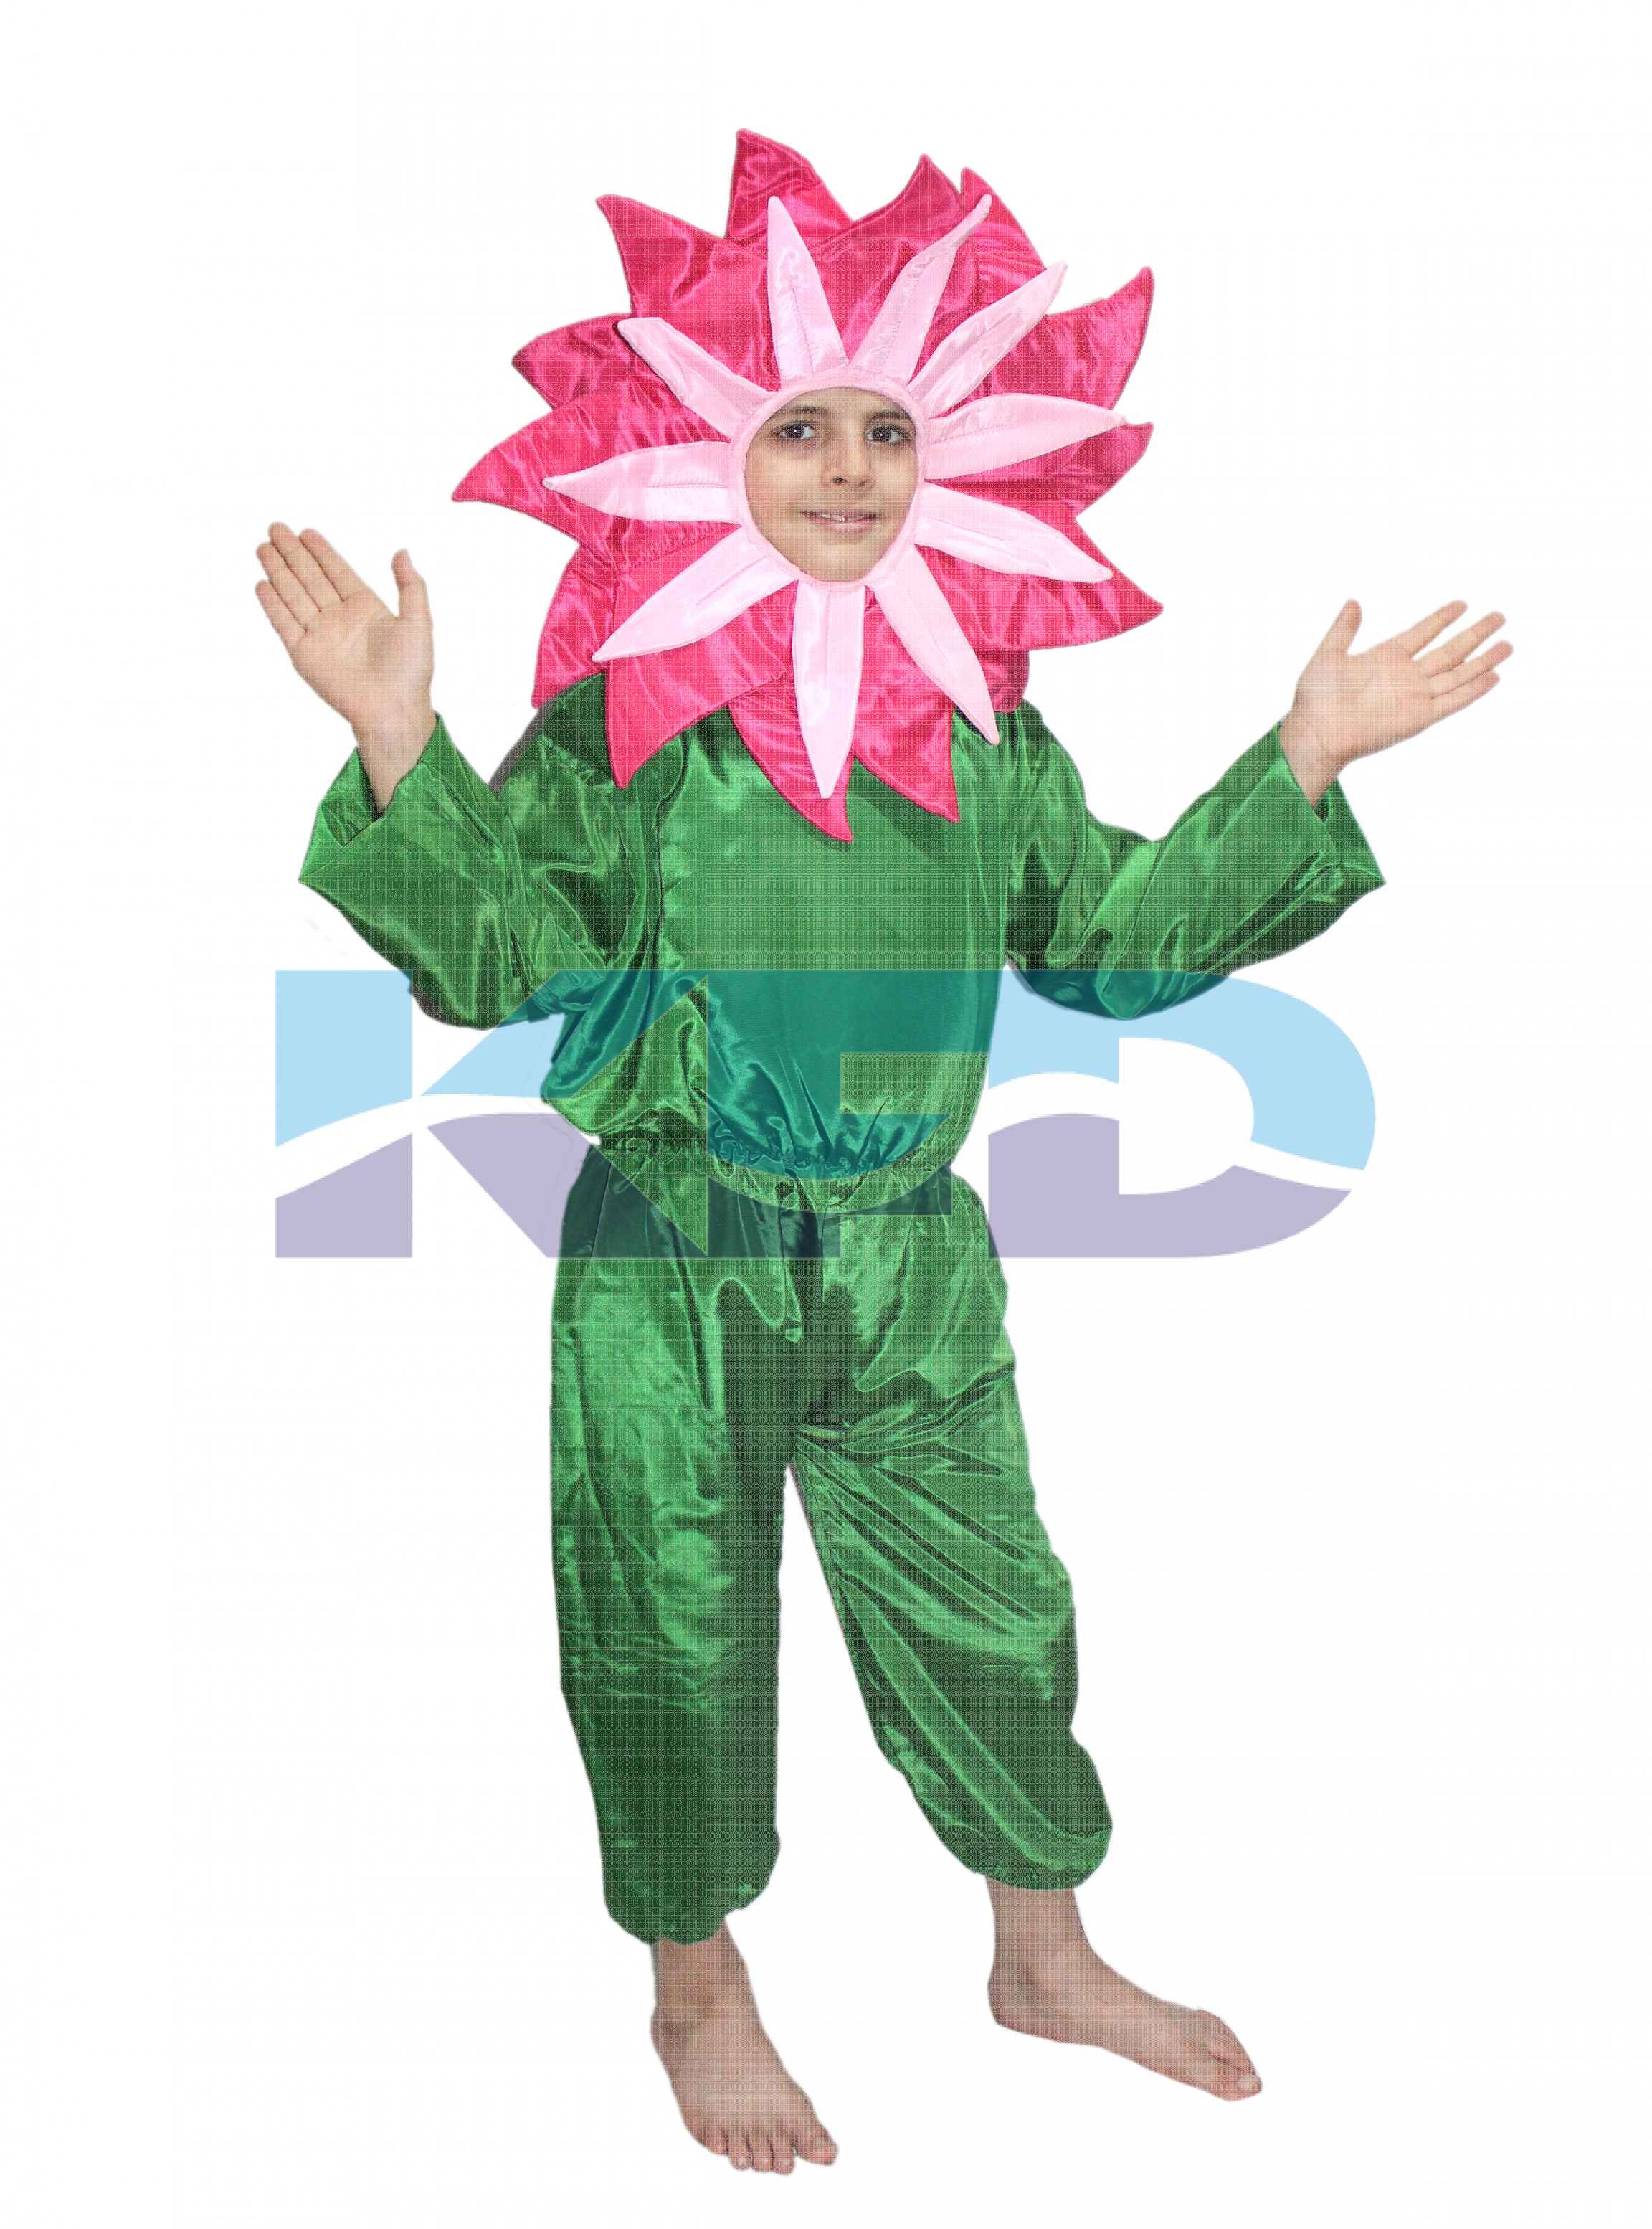  Mazanta flower Costume,Nature Costume for Annual function/Theme Party/Stage Shows/Competition/Birthday Party Dress